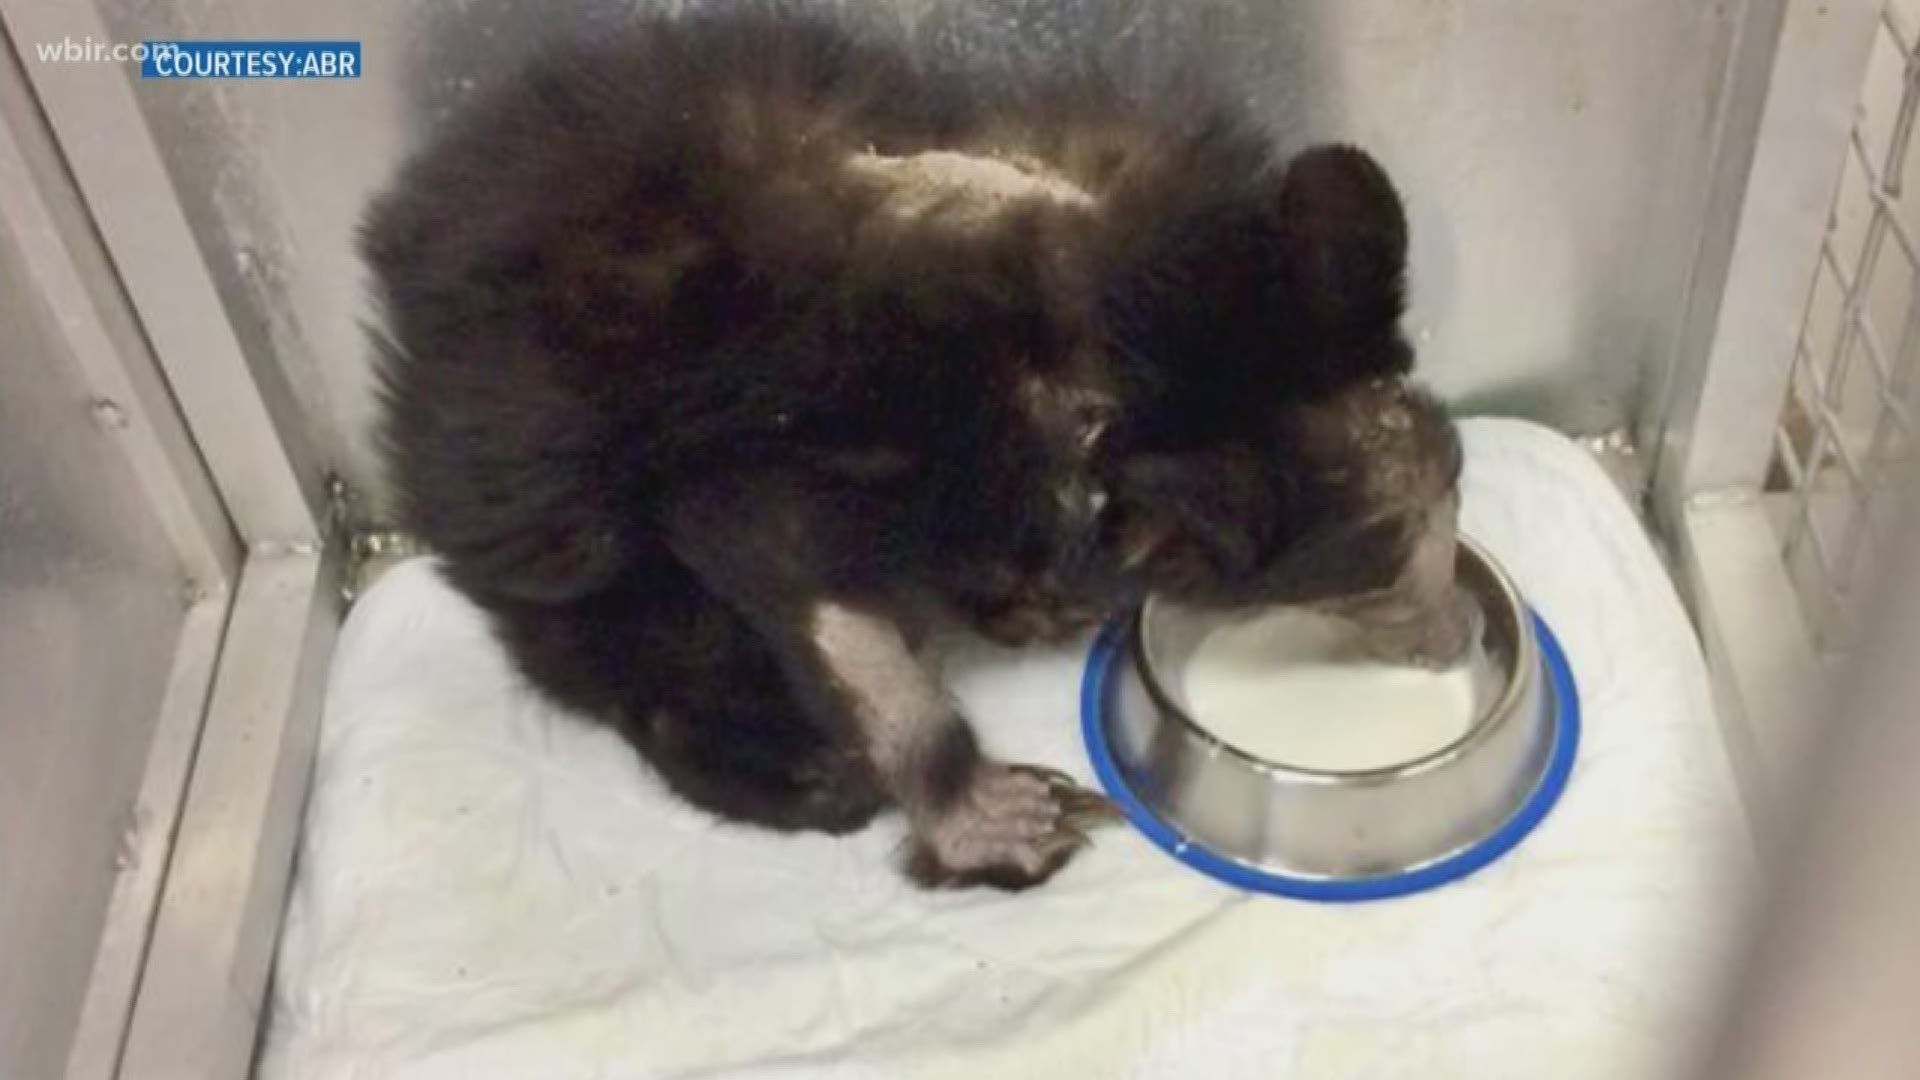 A bear in desperate need of food is recovering at the Appalachian Bear Rescue.